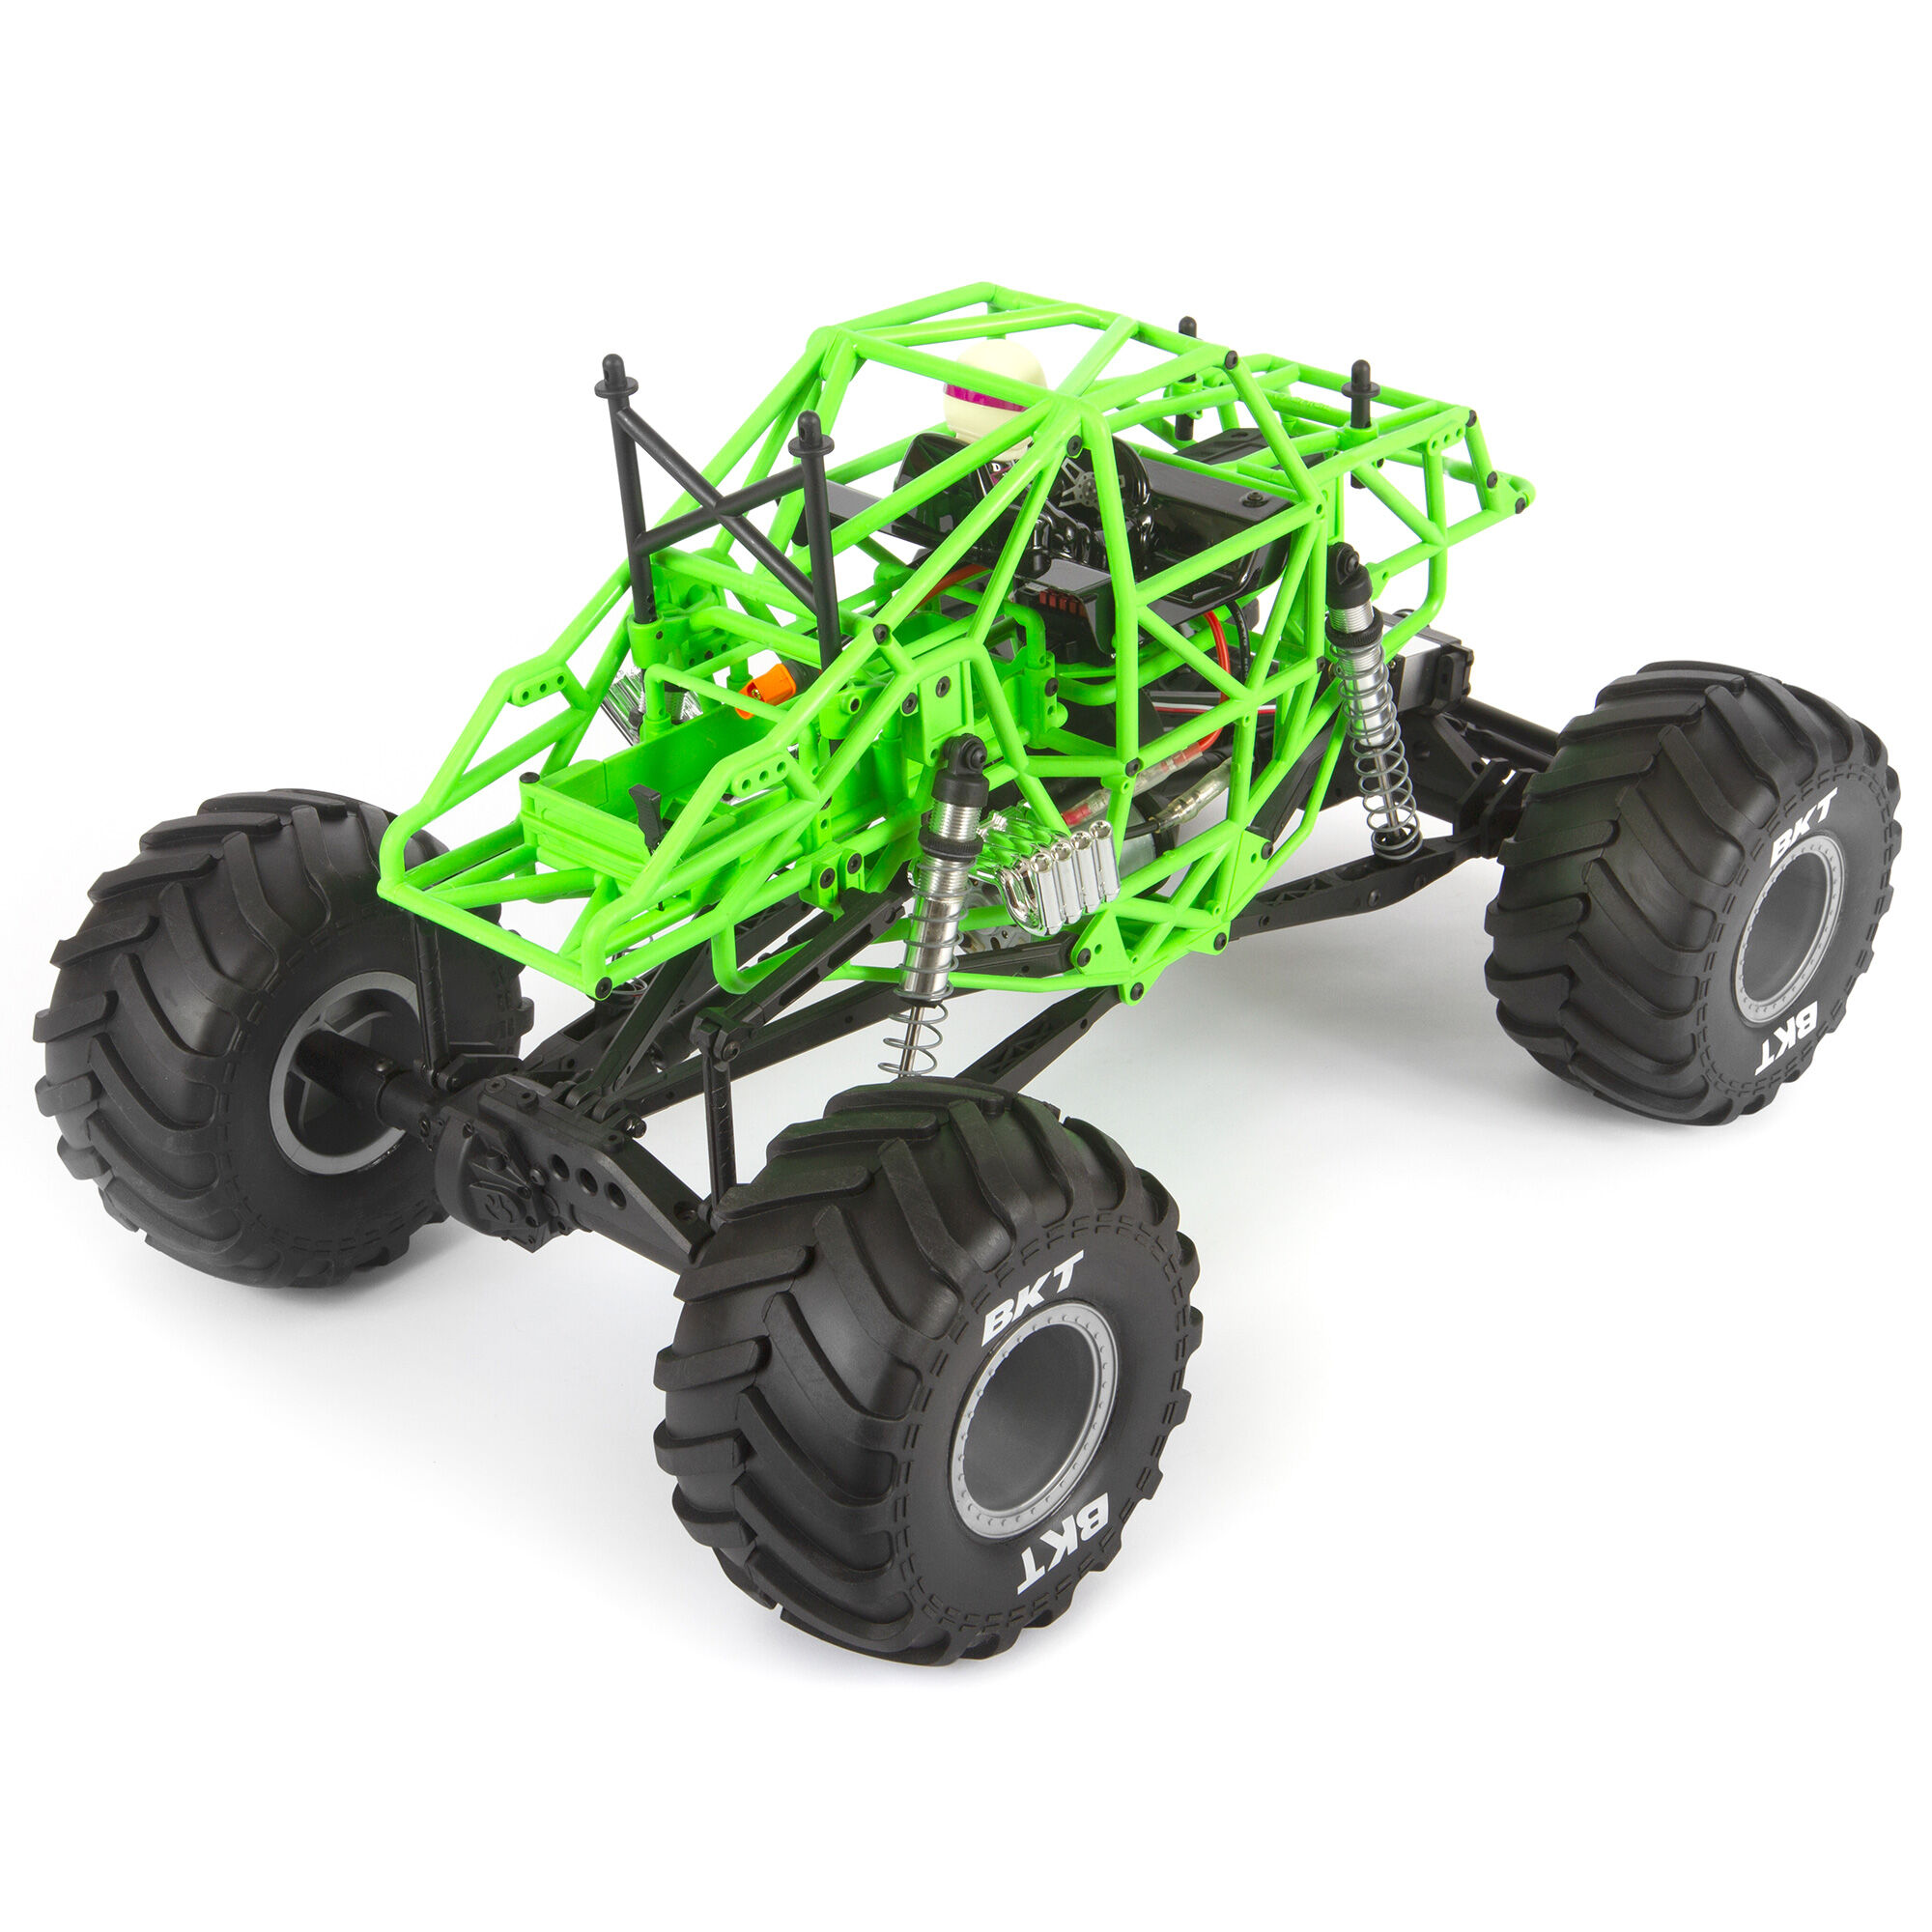 1/10 SMT10 Grave Digger 4WD Brushed Monster Truck RTR | Axial